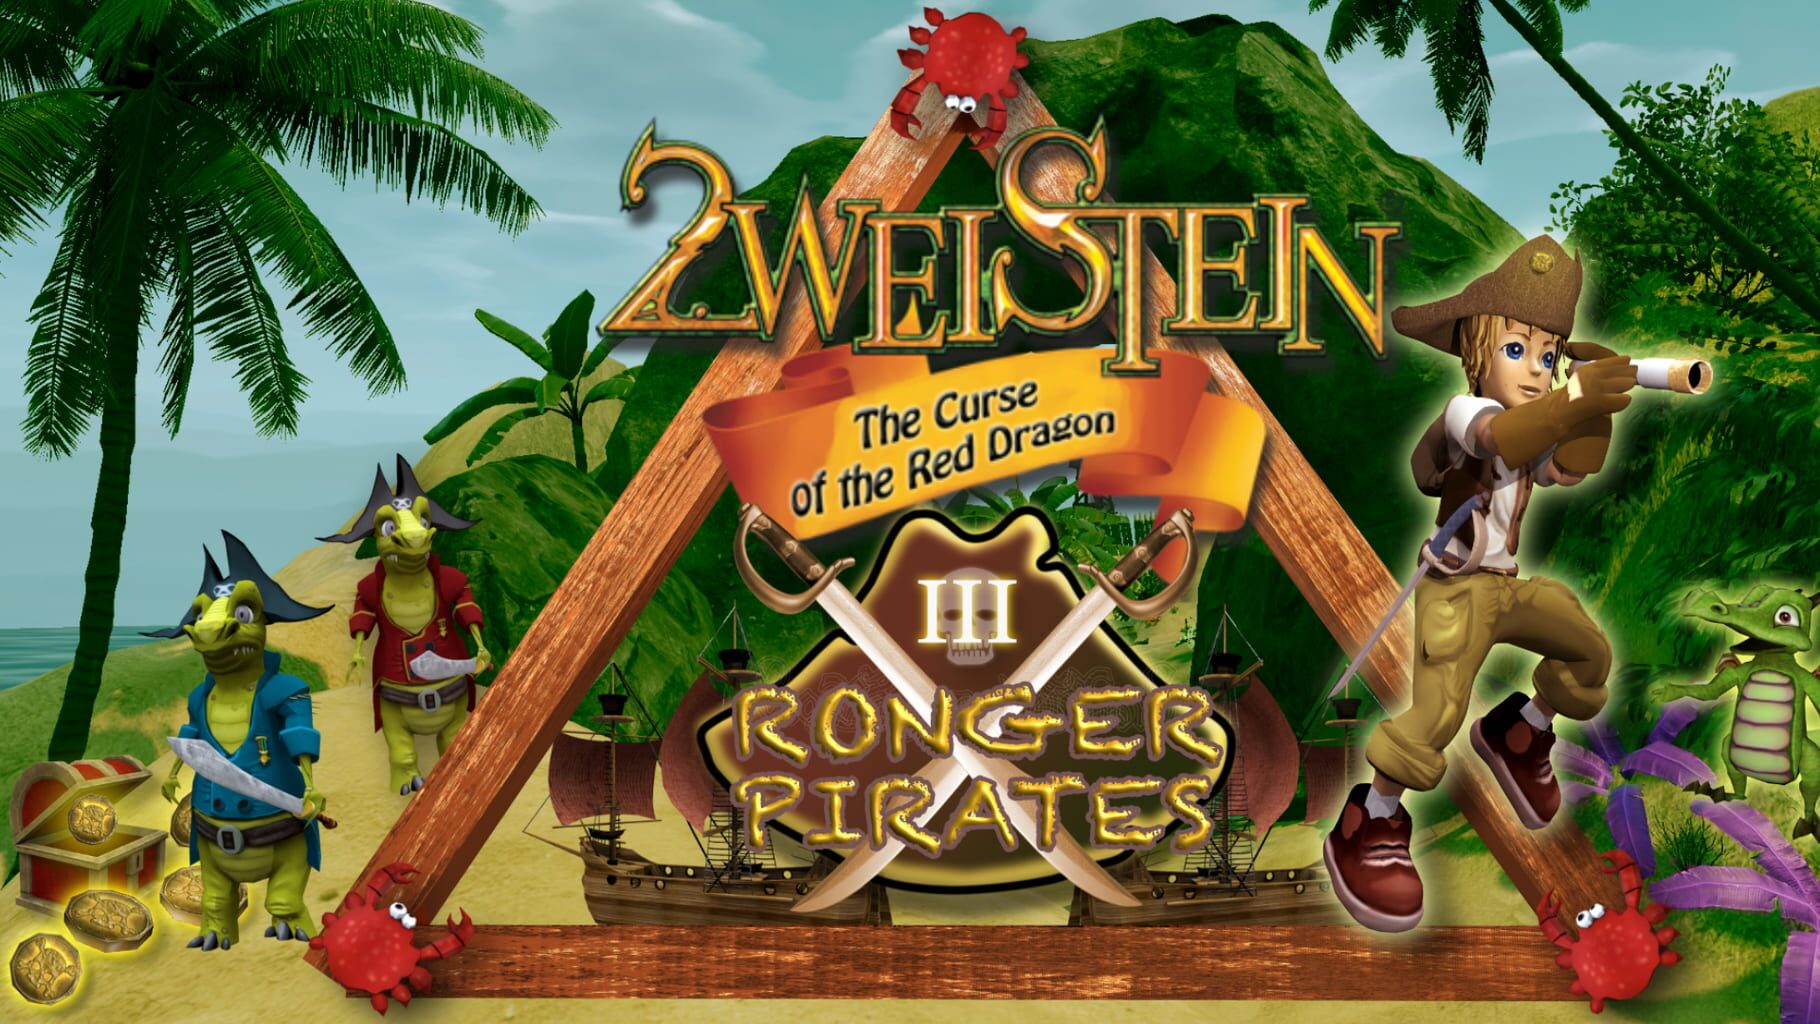 2weistein: The Curse of the Red Dragon 3 - Ronger Pirates artwork